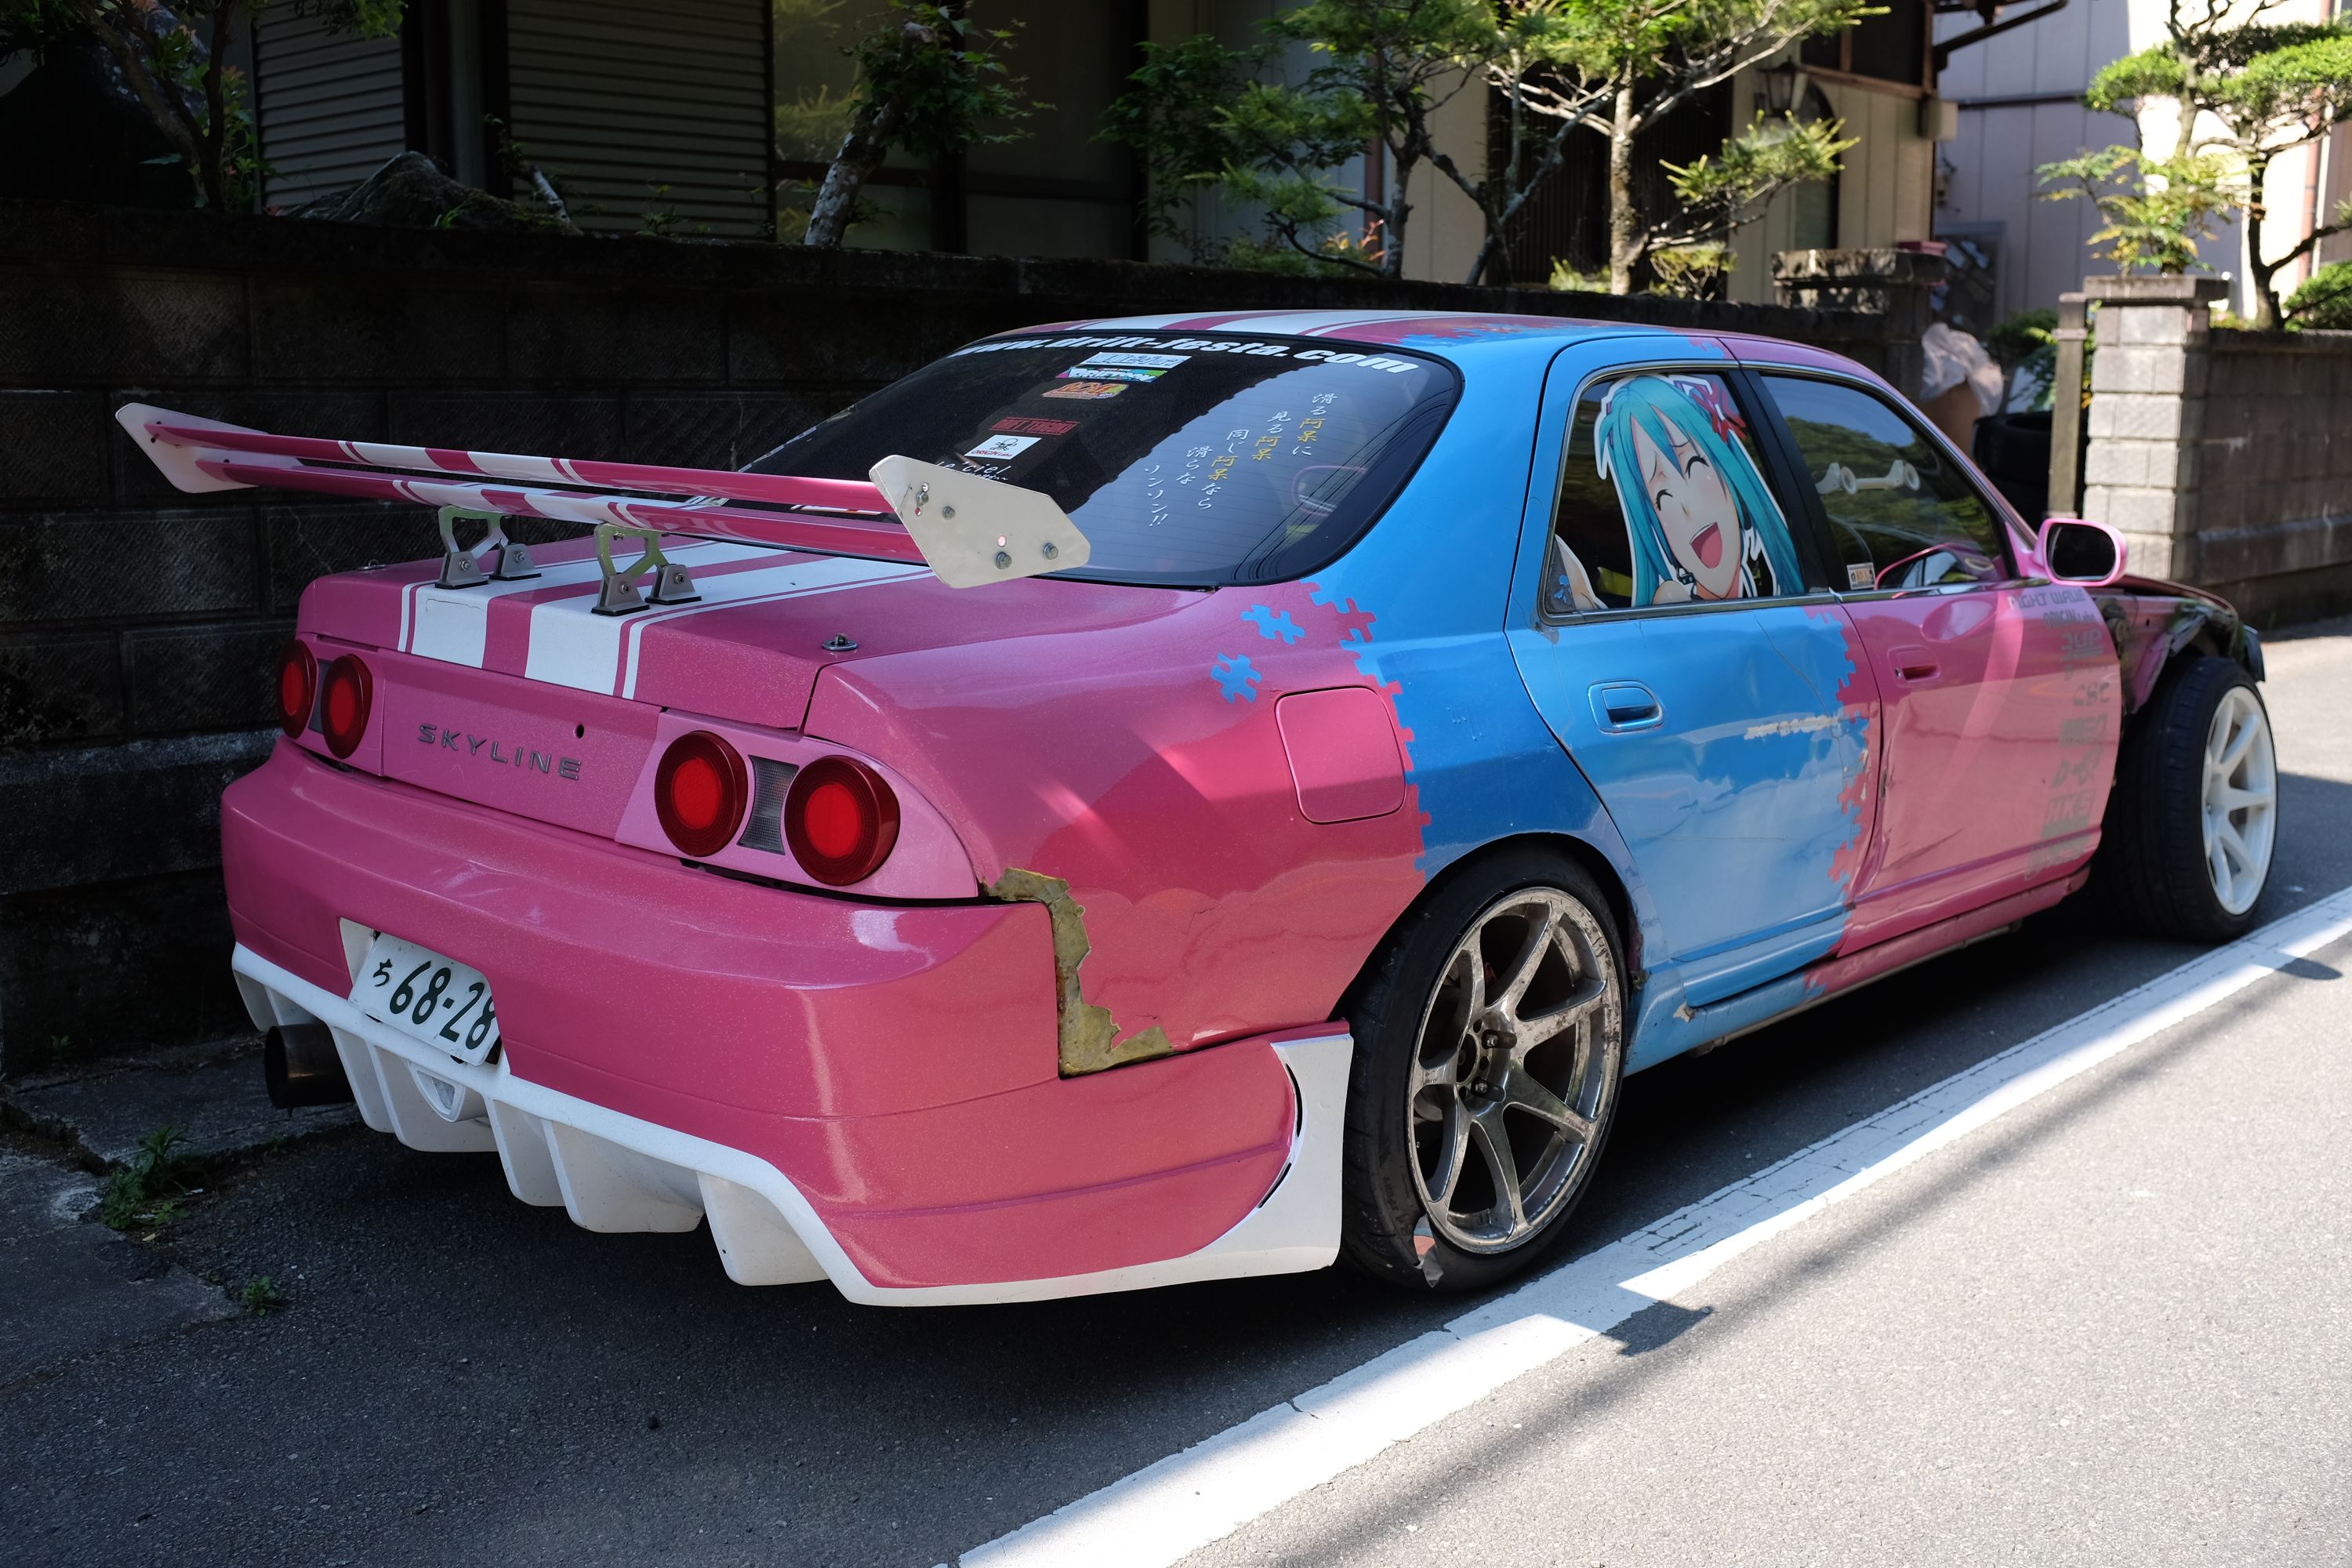 The pink rear end of the Nissan Skyline has a huge aftermarket wing.